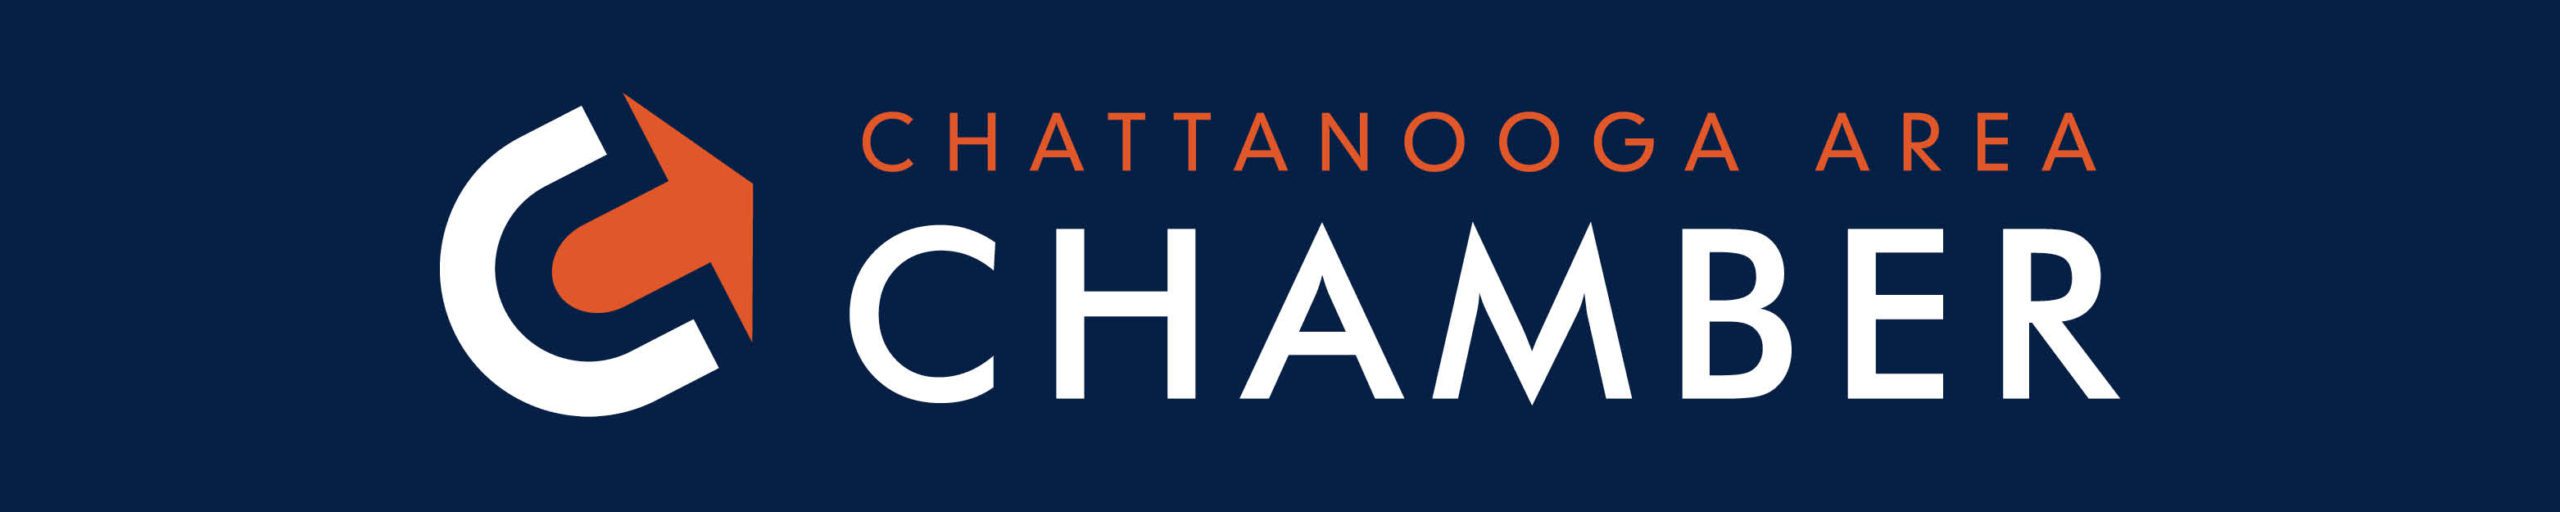 Chattanooga Area Chamber of Commerce ad